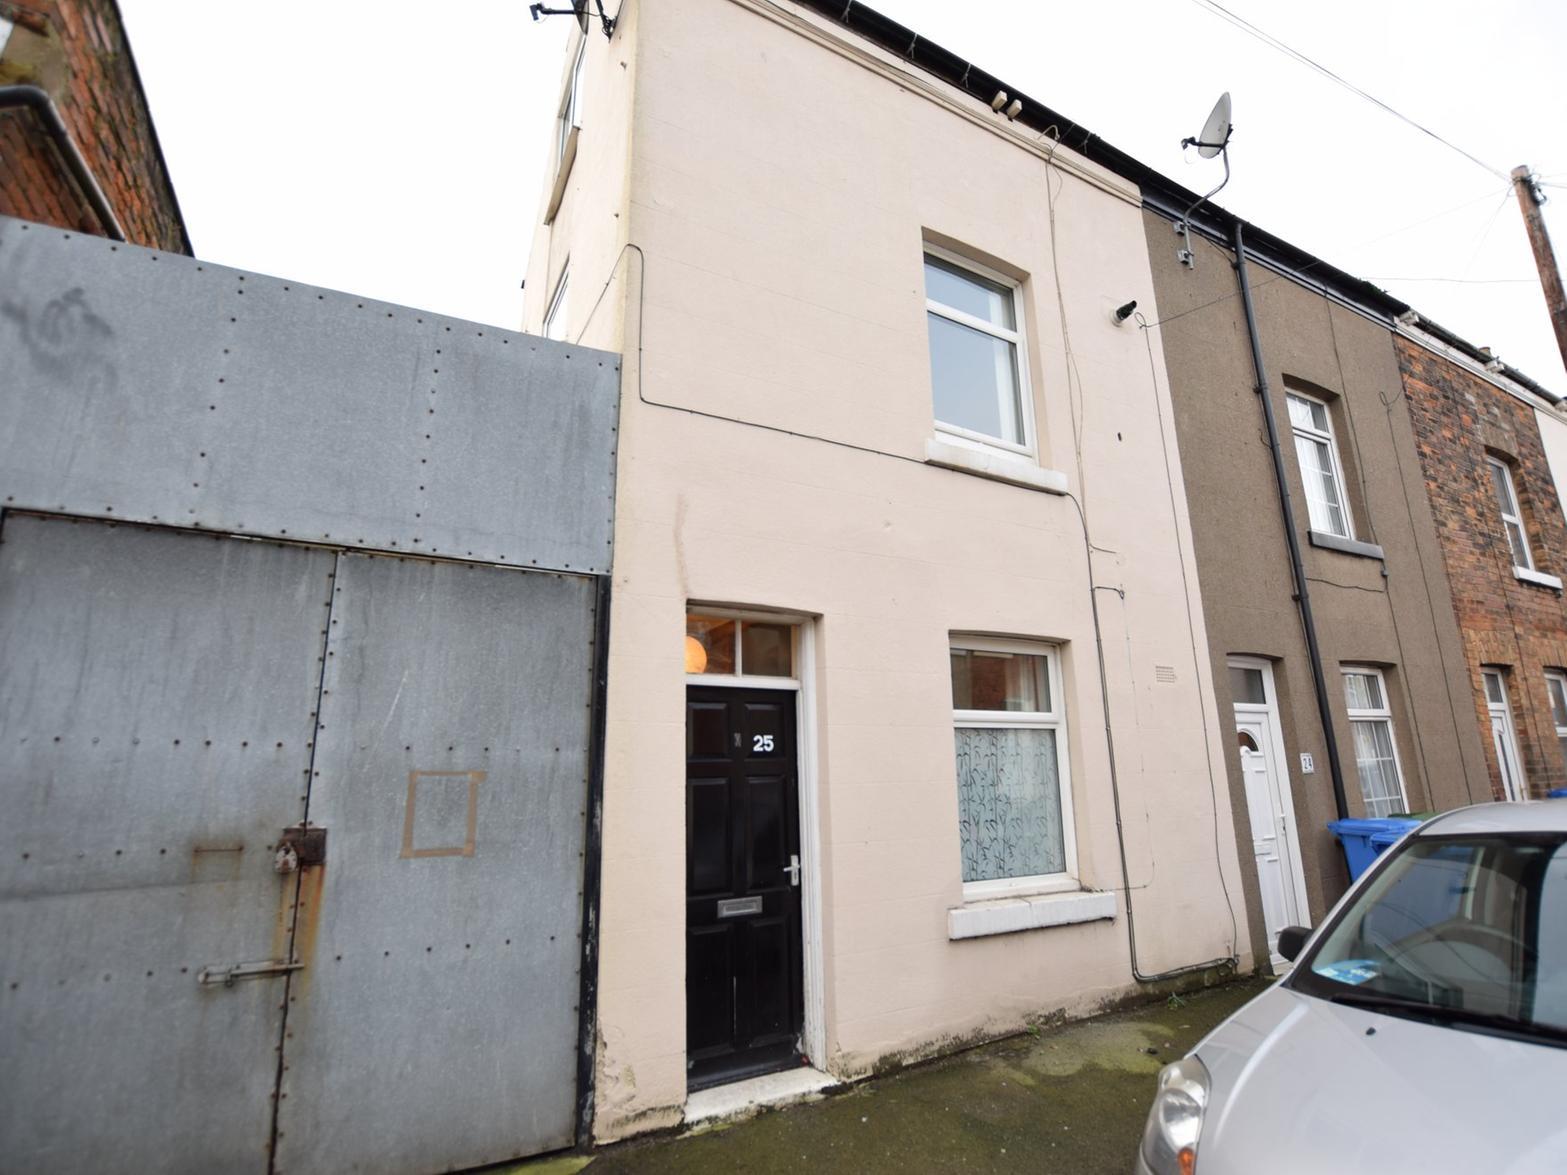 This one bedroom end terrace house is described as ideal for first time buyers and is listed with a guide price of 80,000.